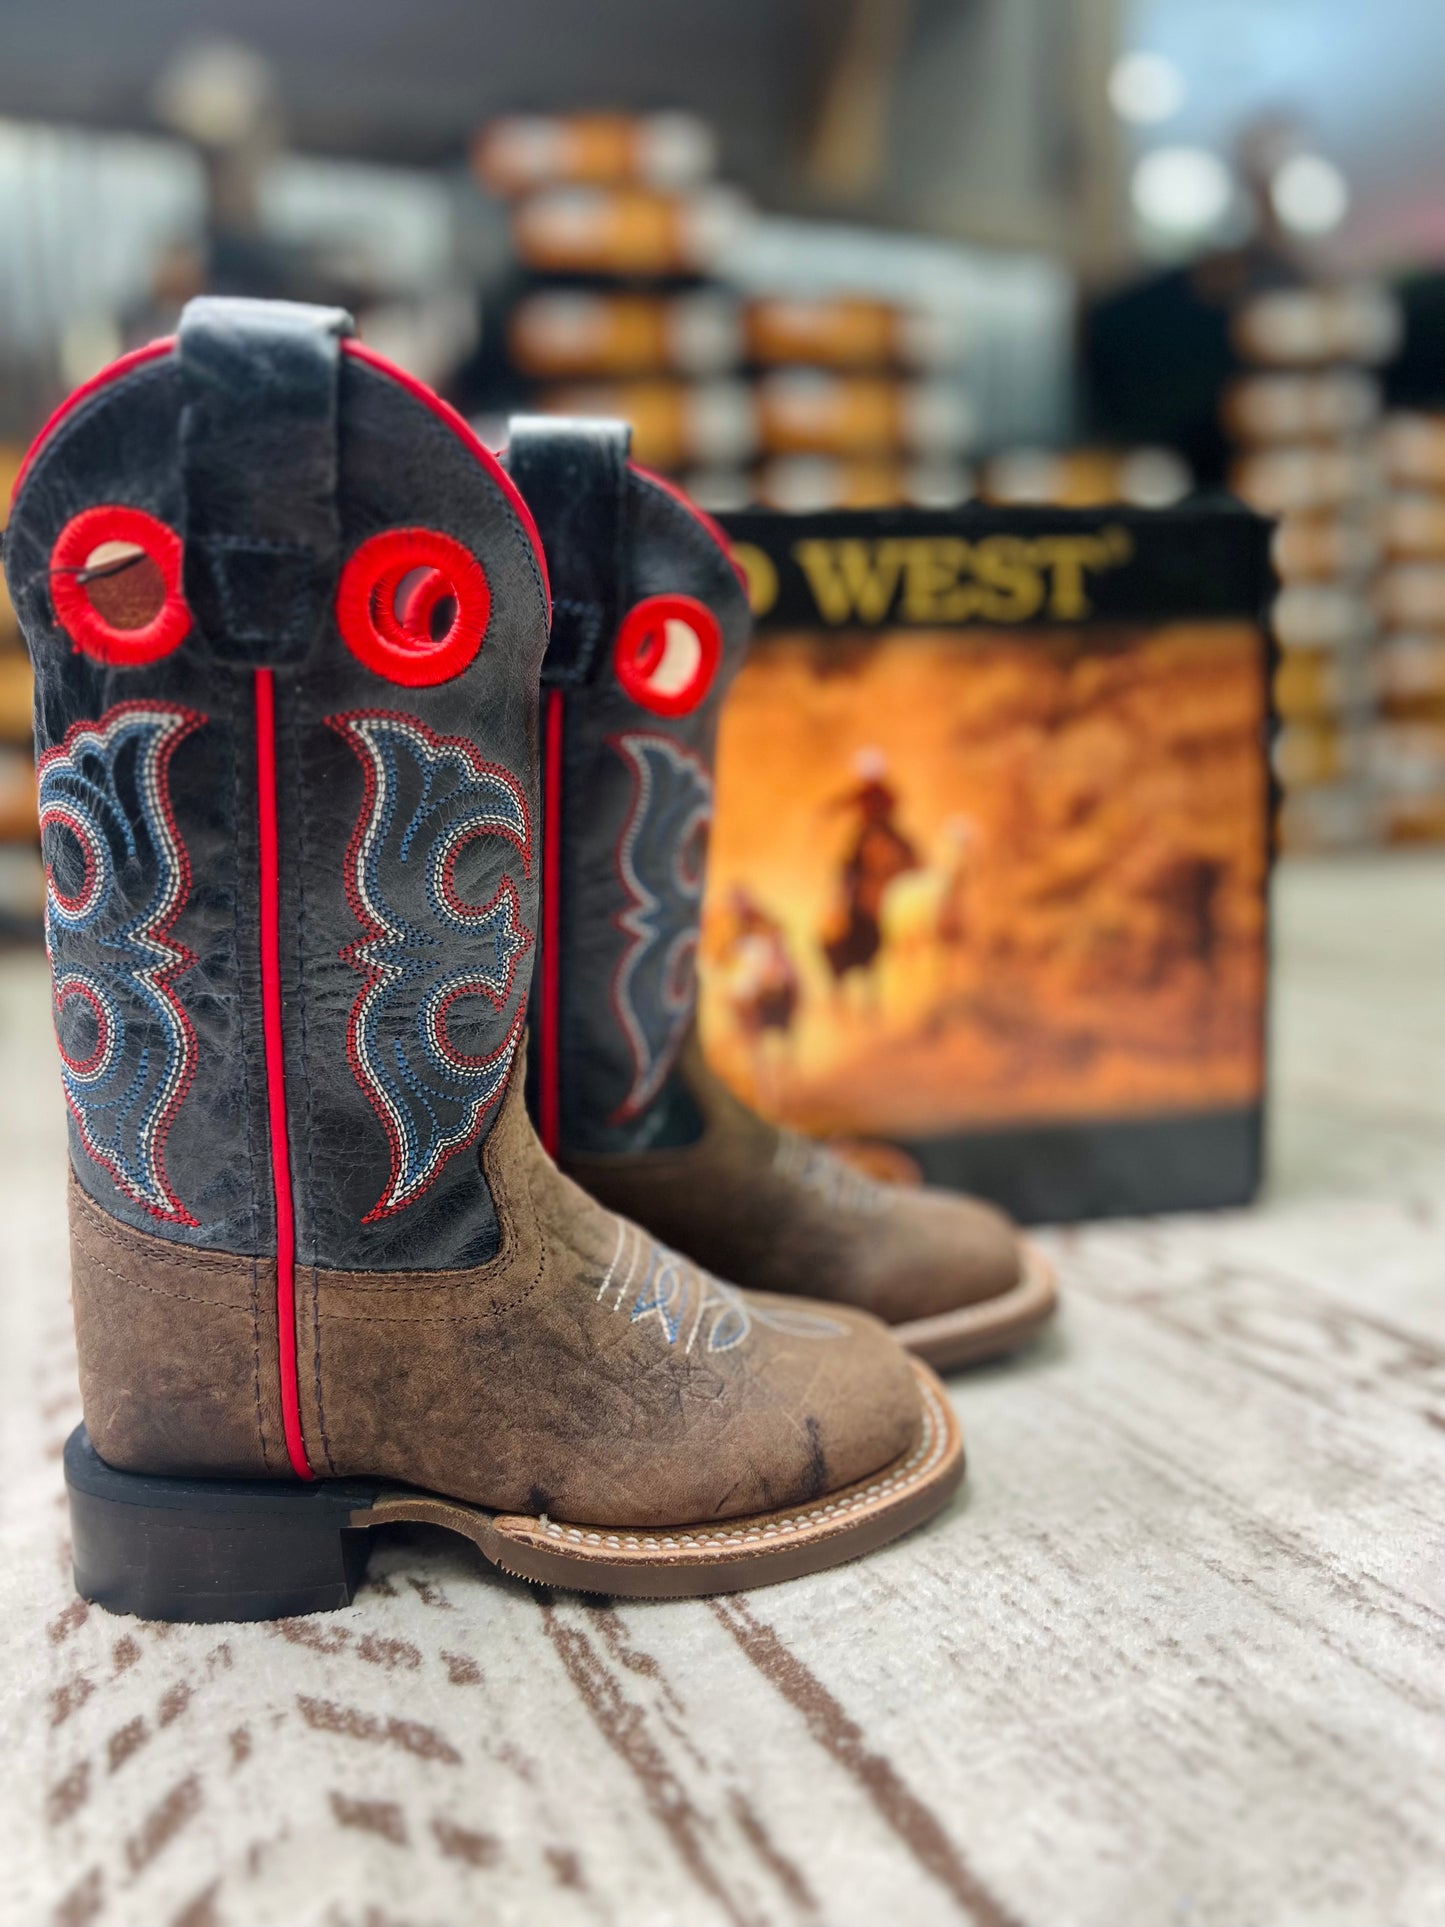 Old West #BSC1969 Boy's Boot